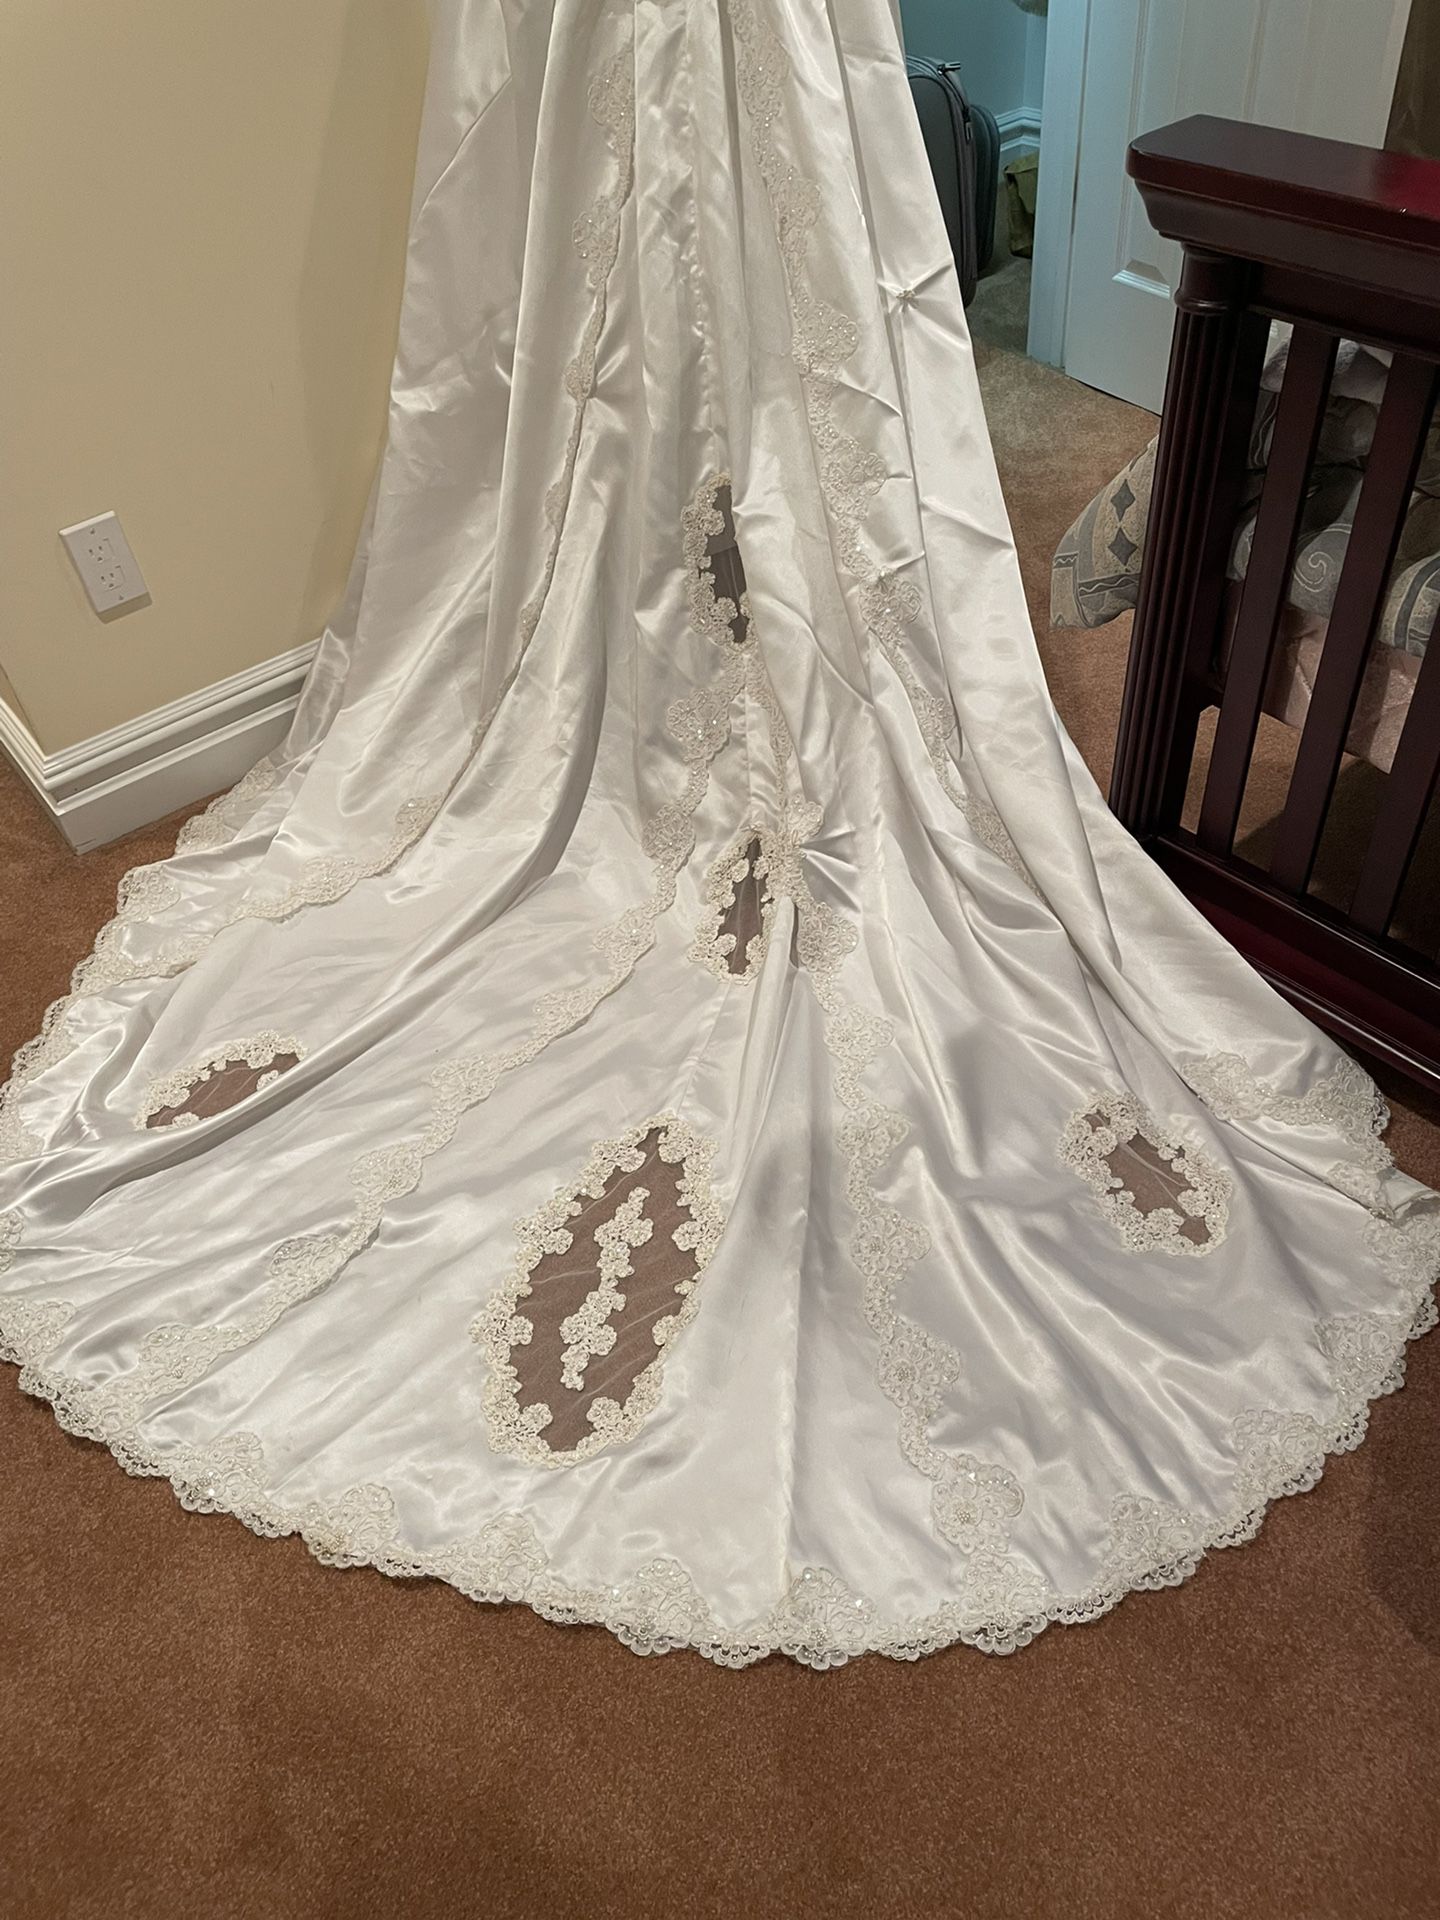 Wedding Dress To Use For Material 